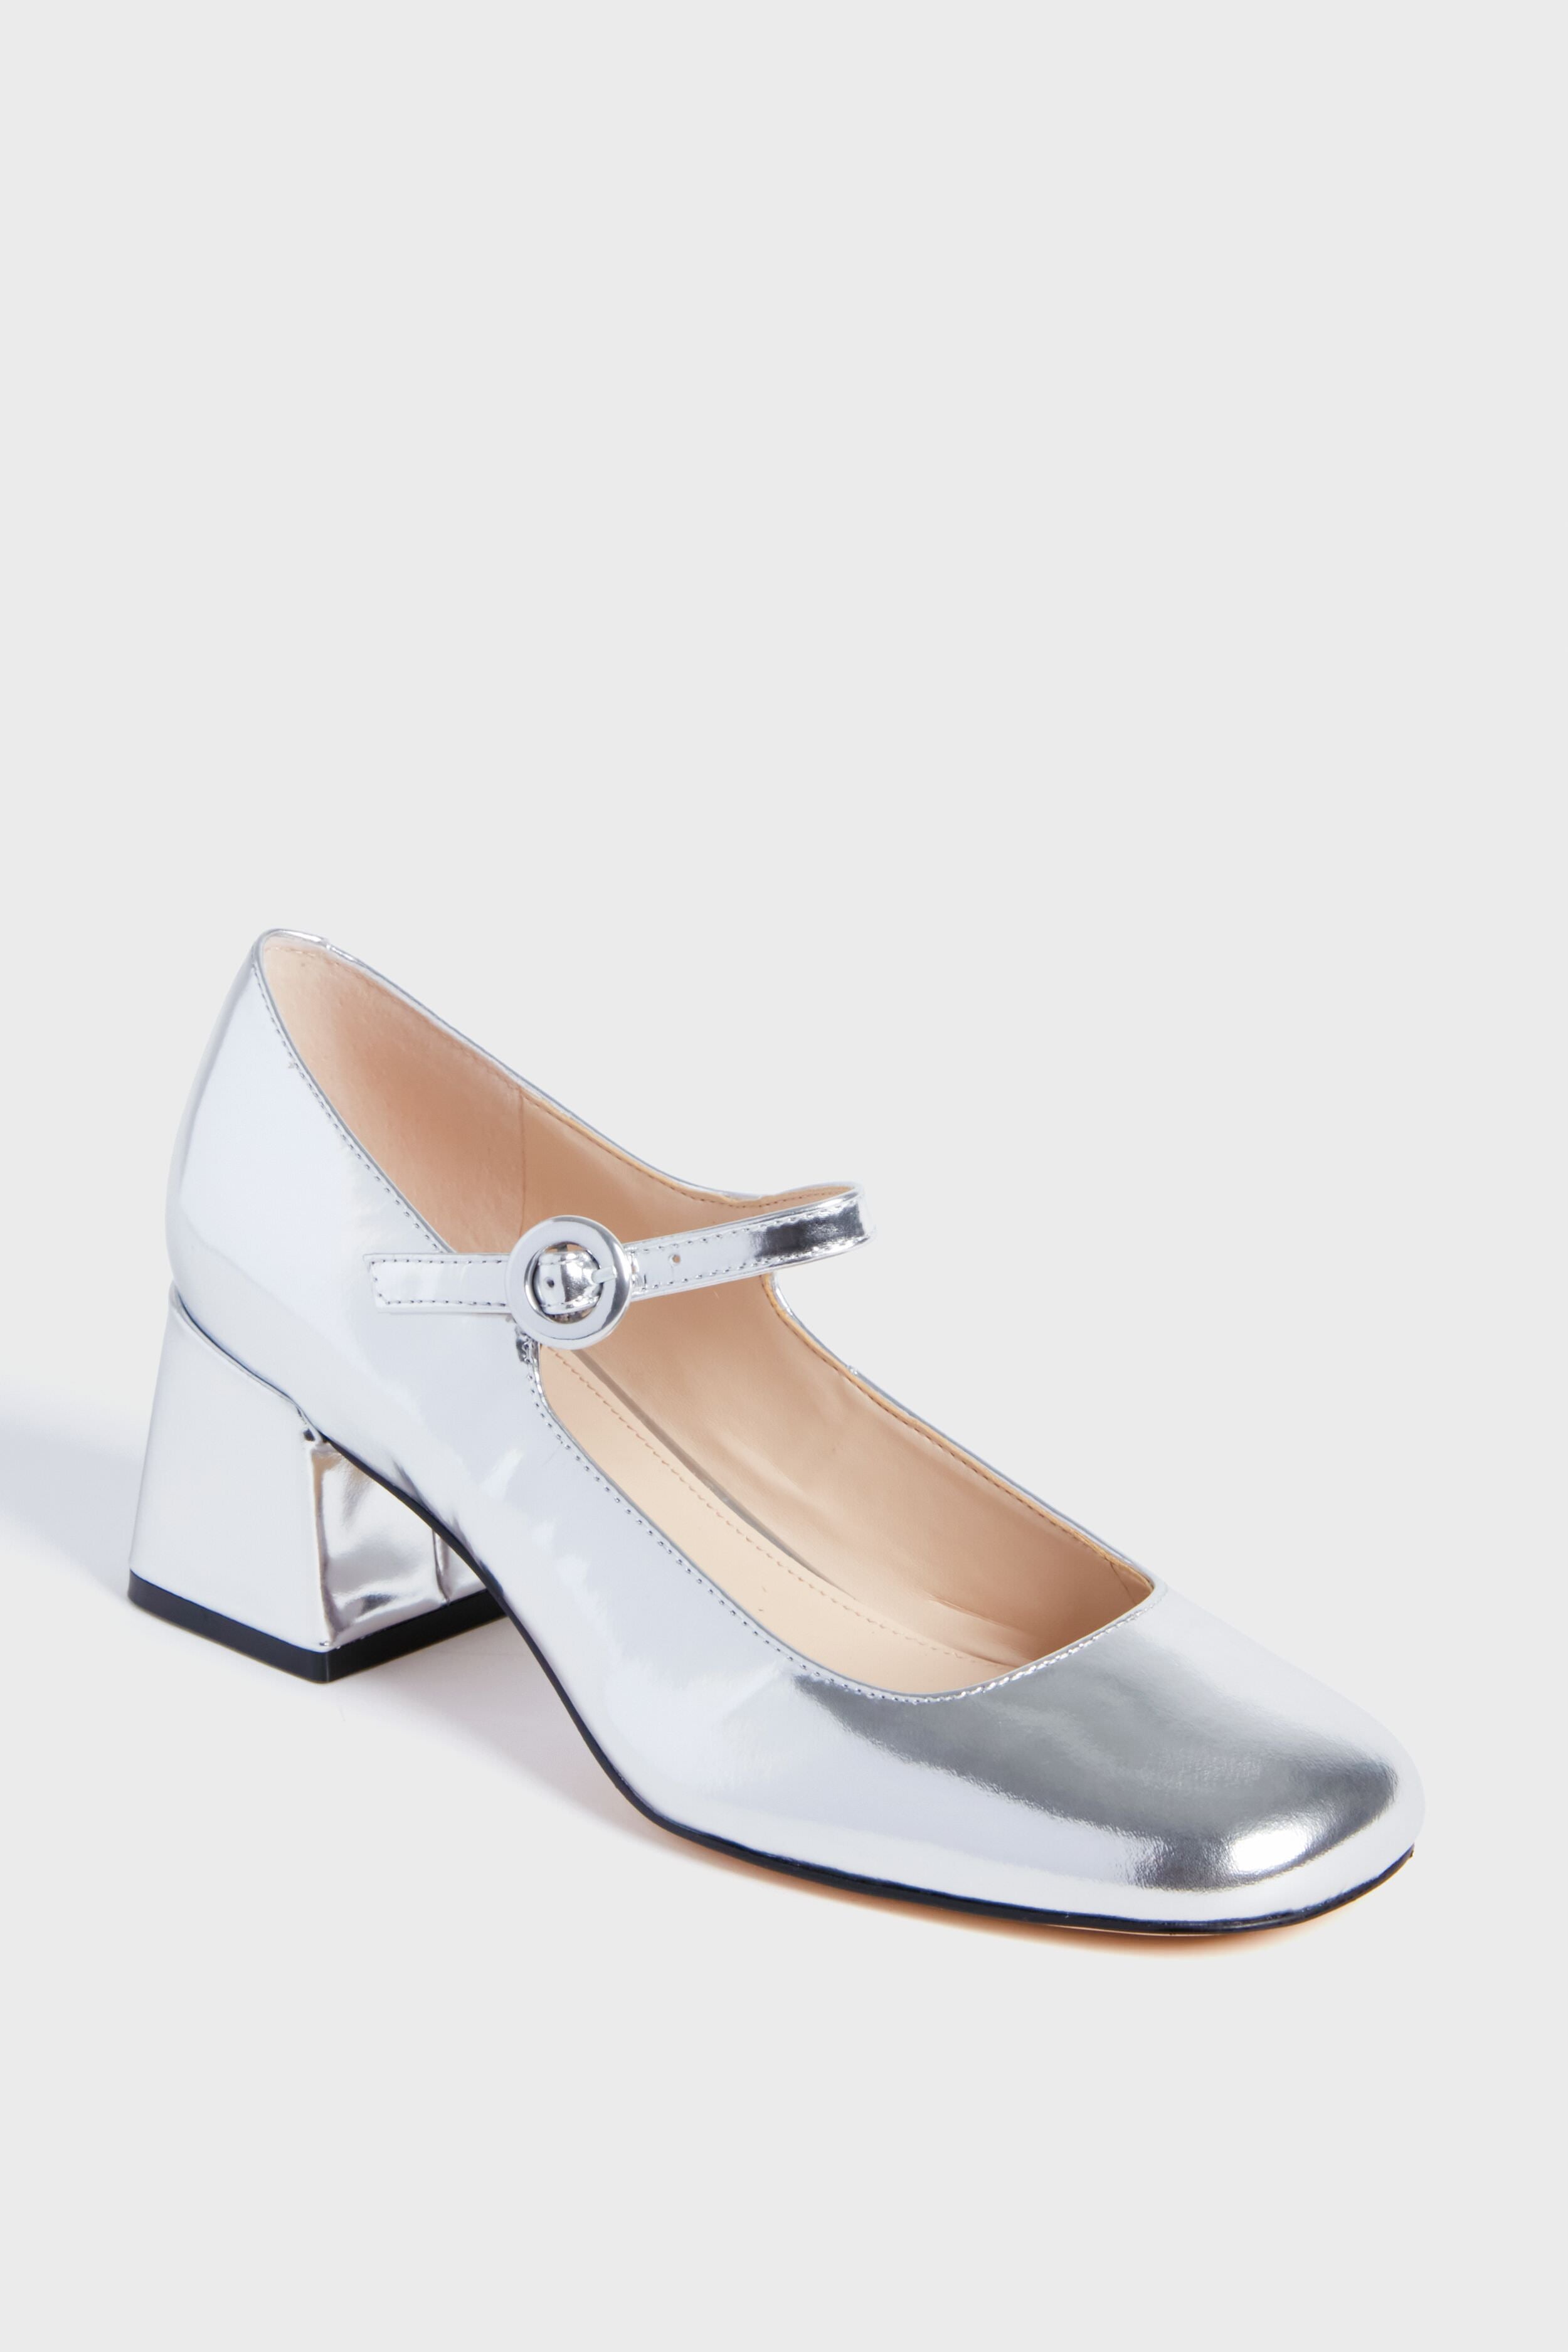 The Best Mary Jane Pumps to Shop Right Now